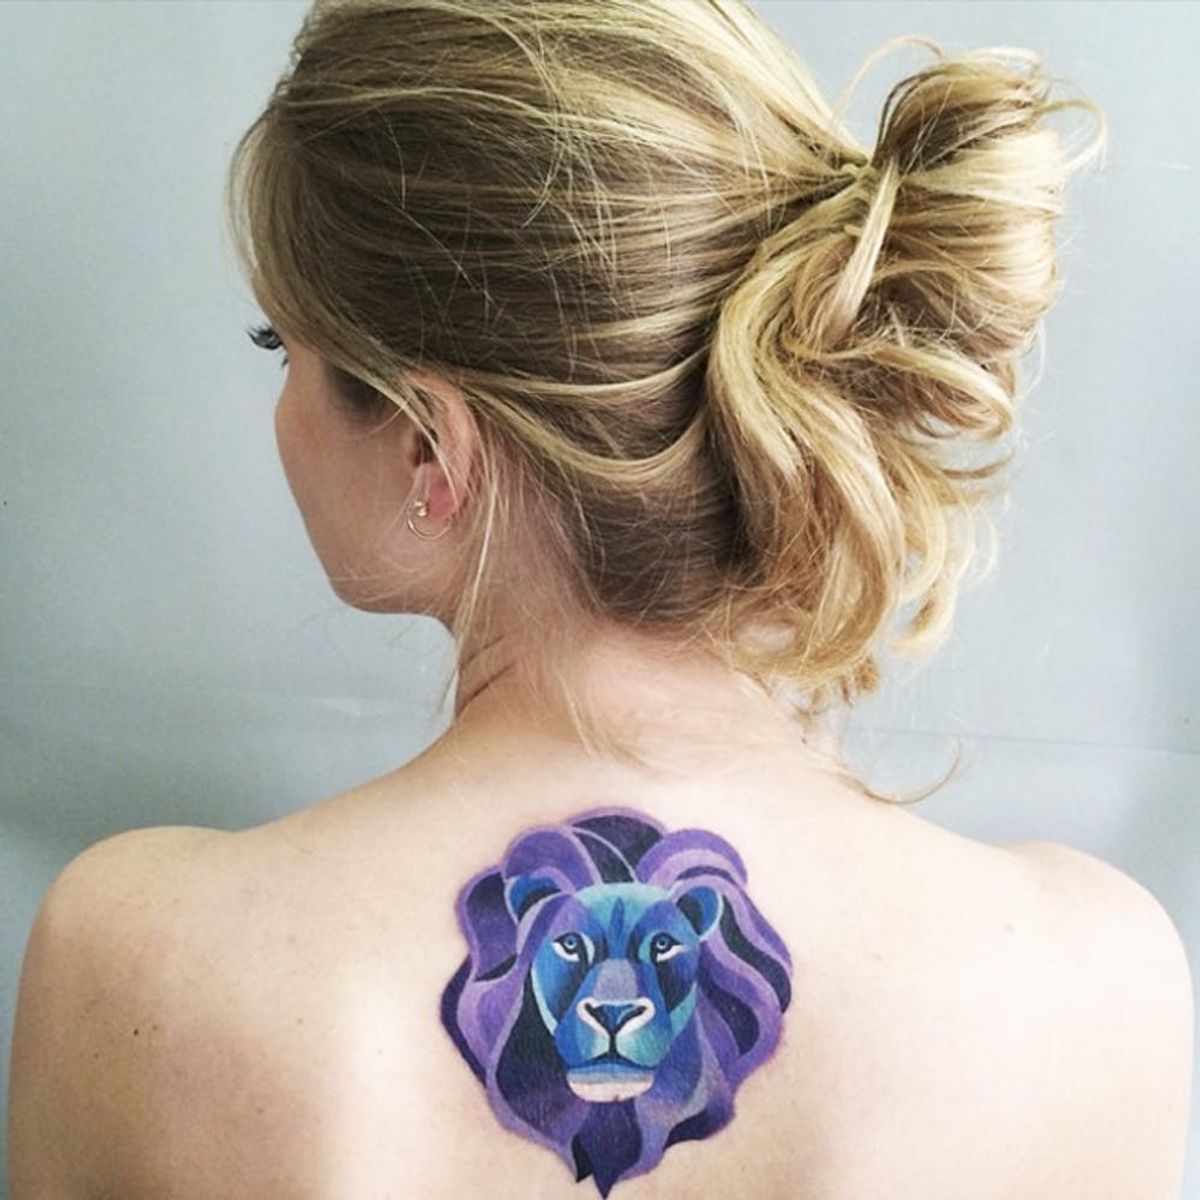 12 Zodiac Tattoos That Put a Stylish Spin on Your Astrological Sign